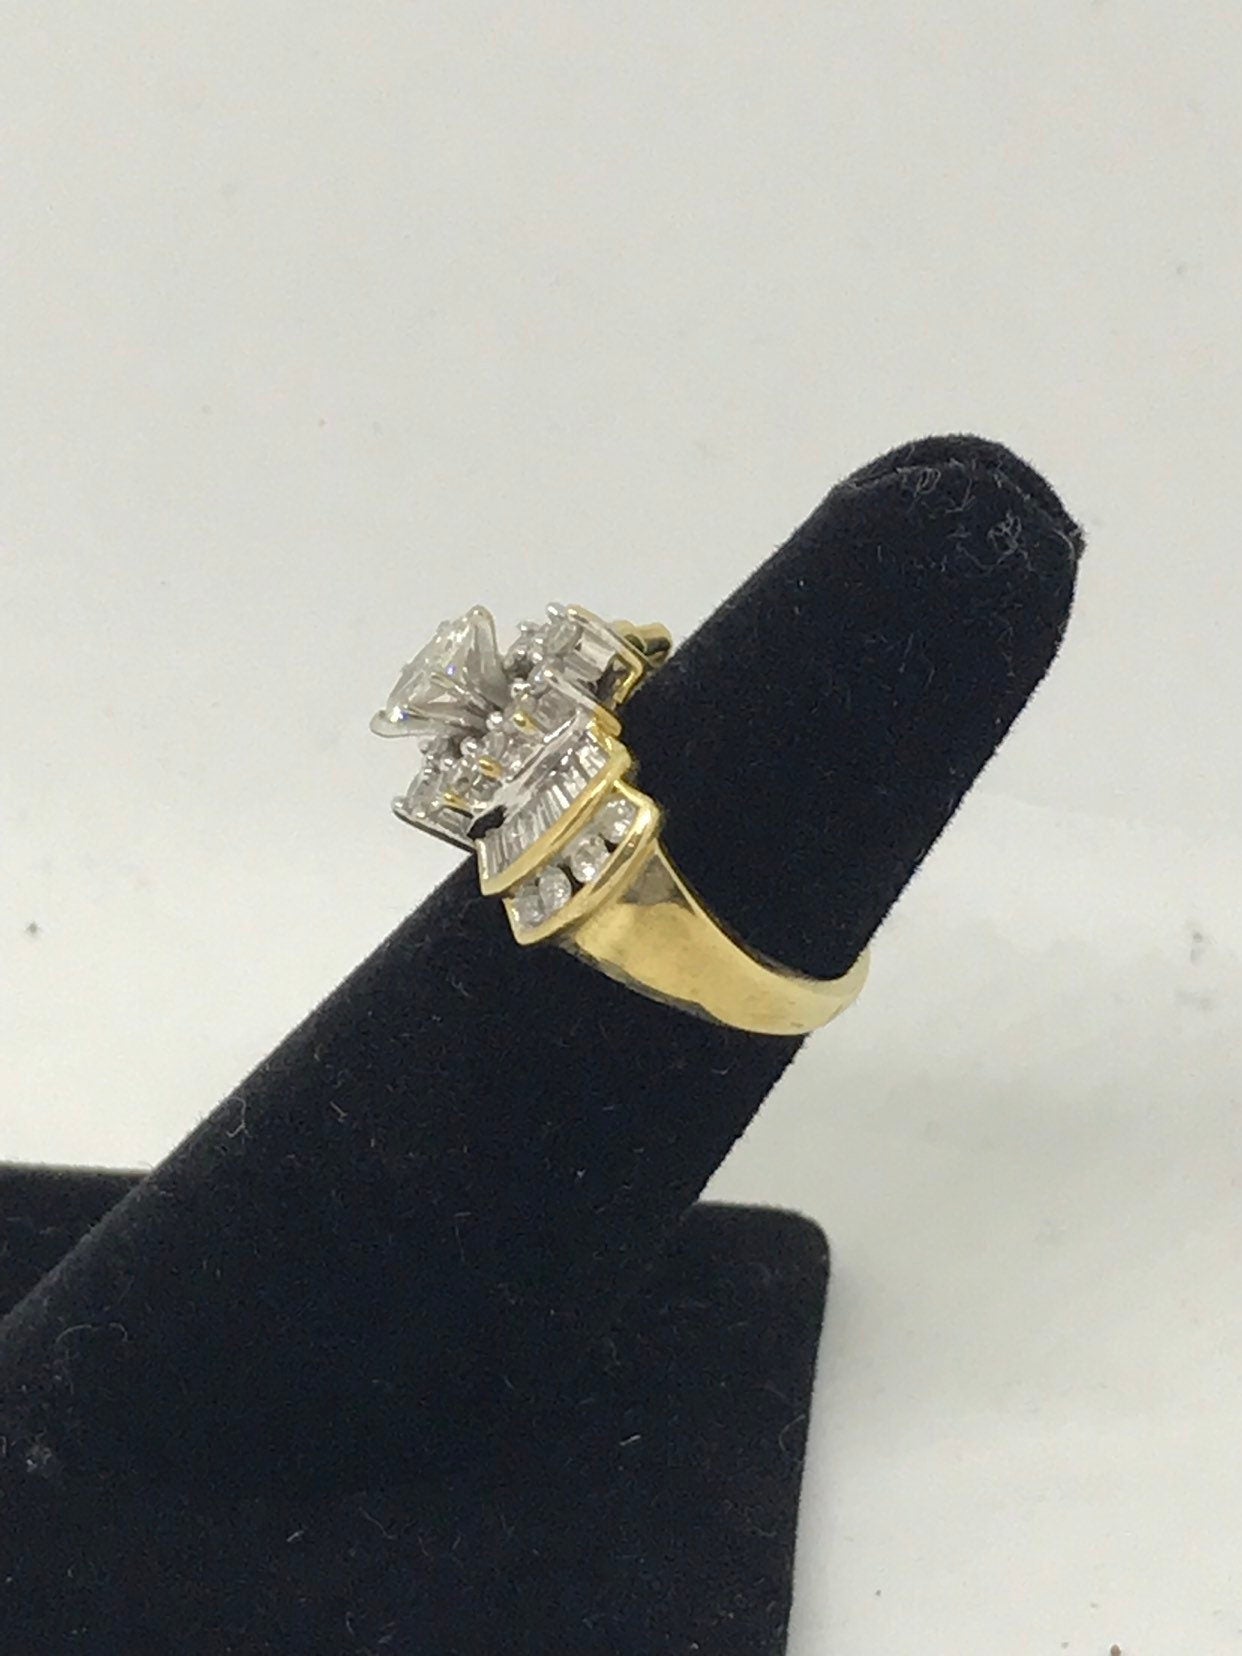 2 Carat Diamond 14K Yellow Gold Engagement Cluster Cocktail Ring (Size 5.25)